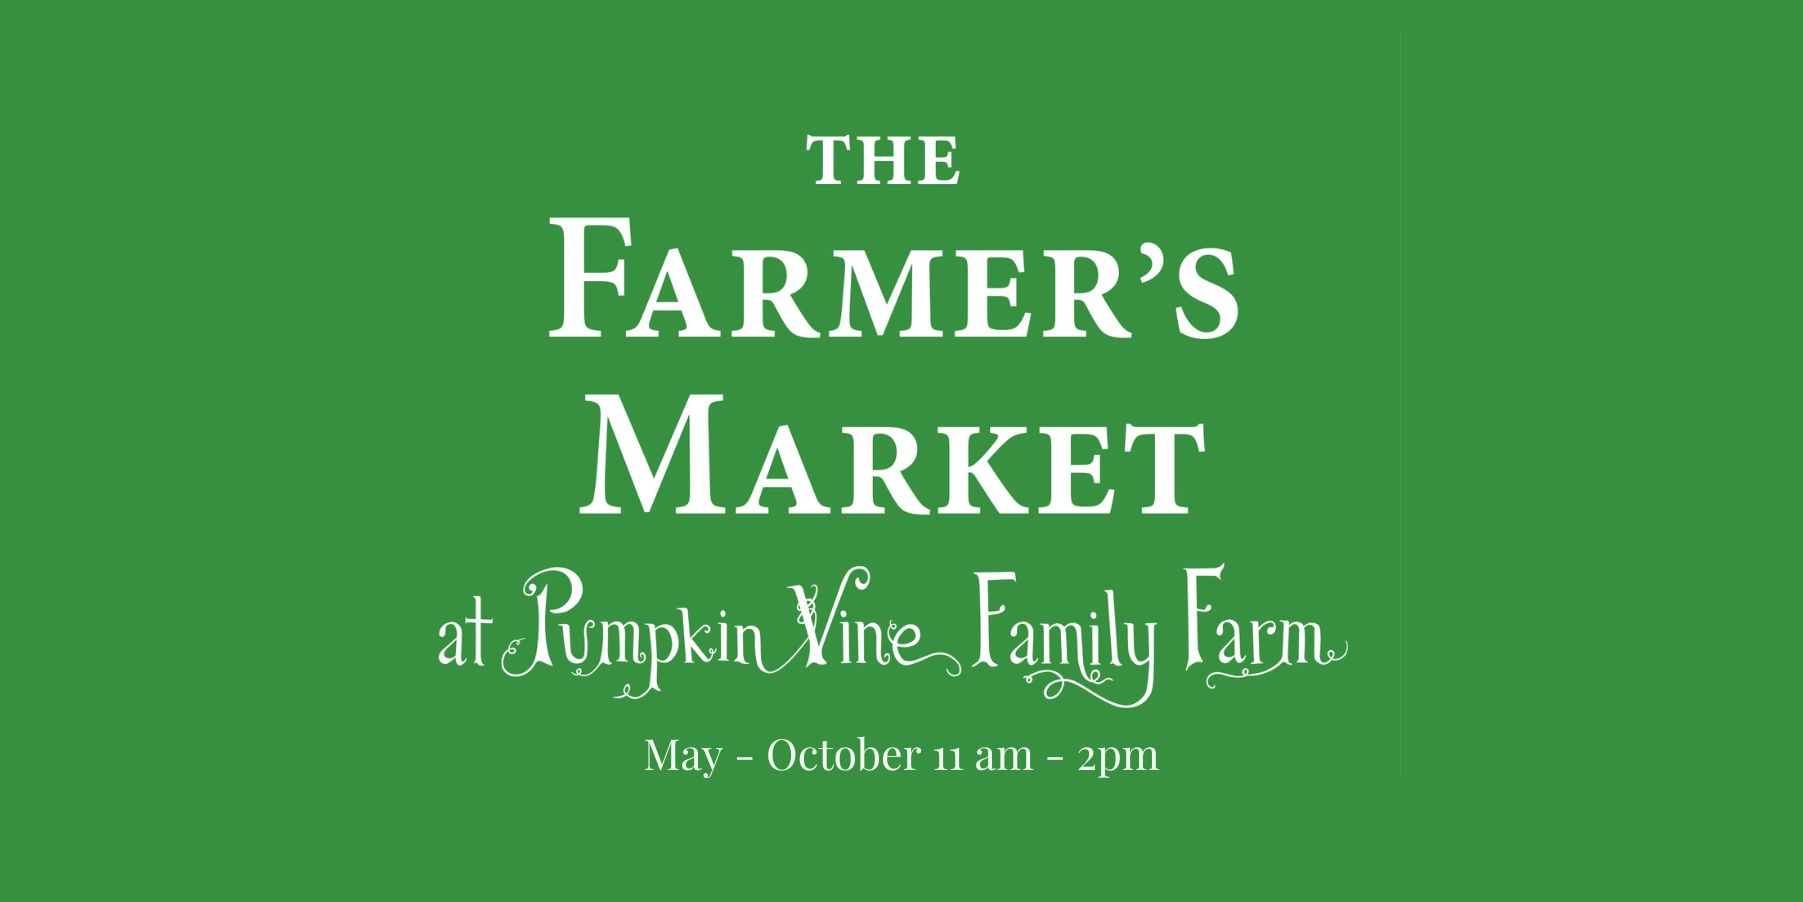 Green Banner with Farmer's Market at Pumpkin Vine Farm written on it and May - Oct 11-2.